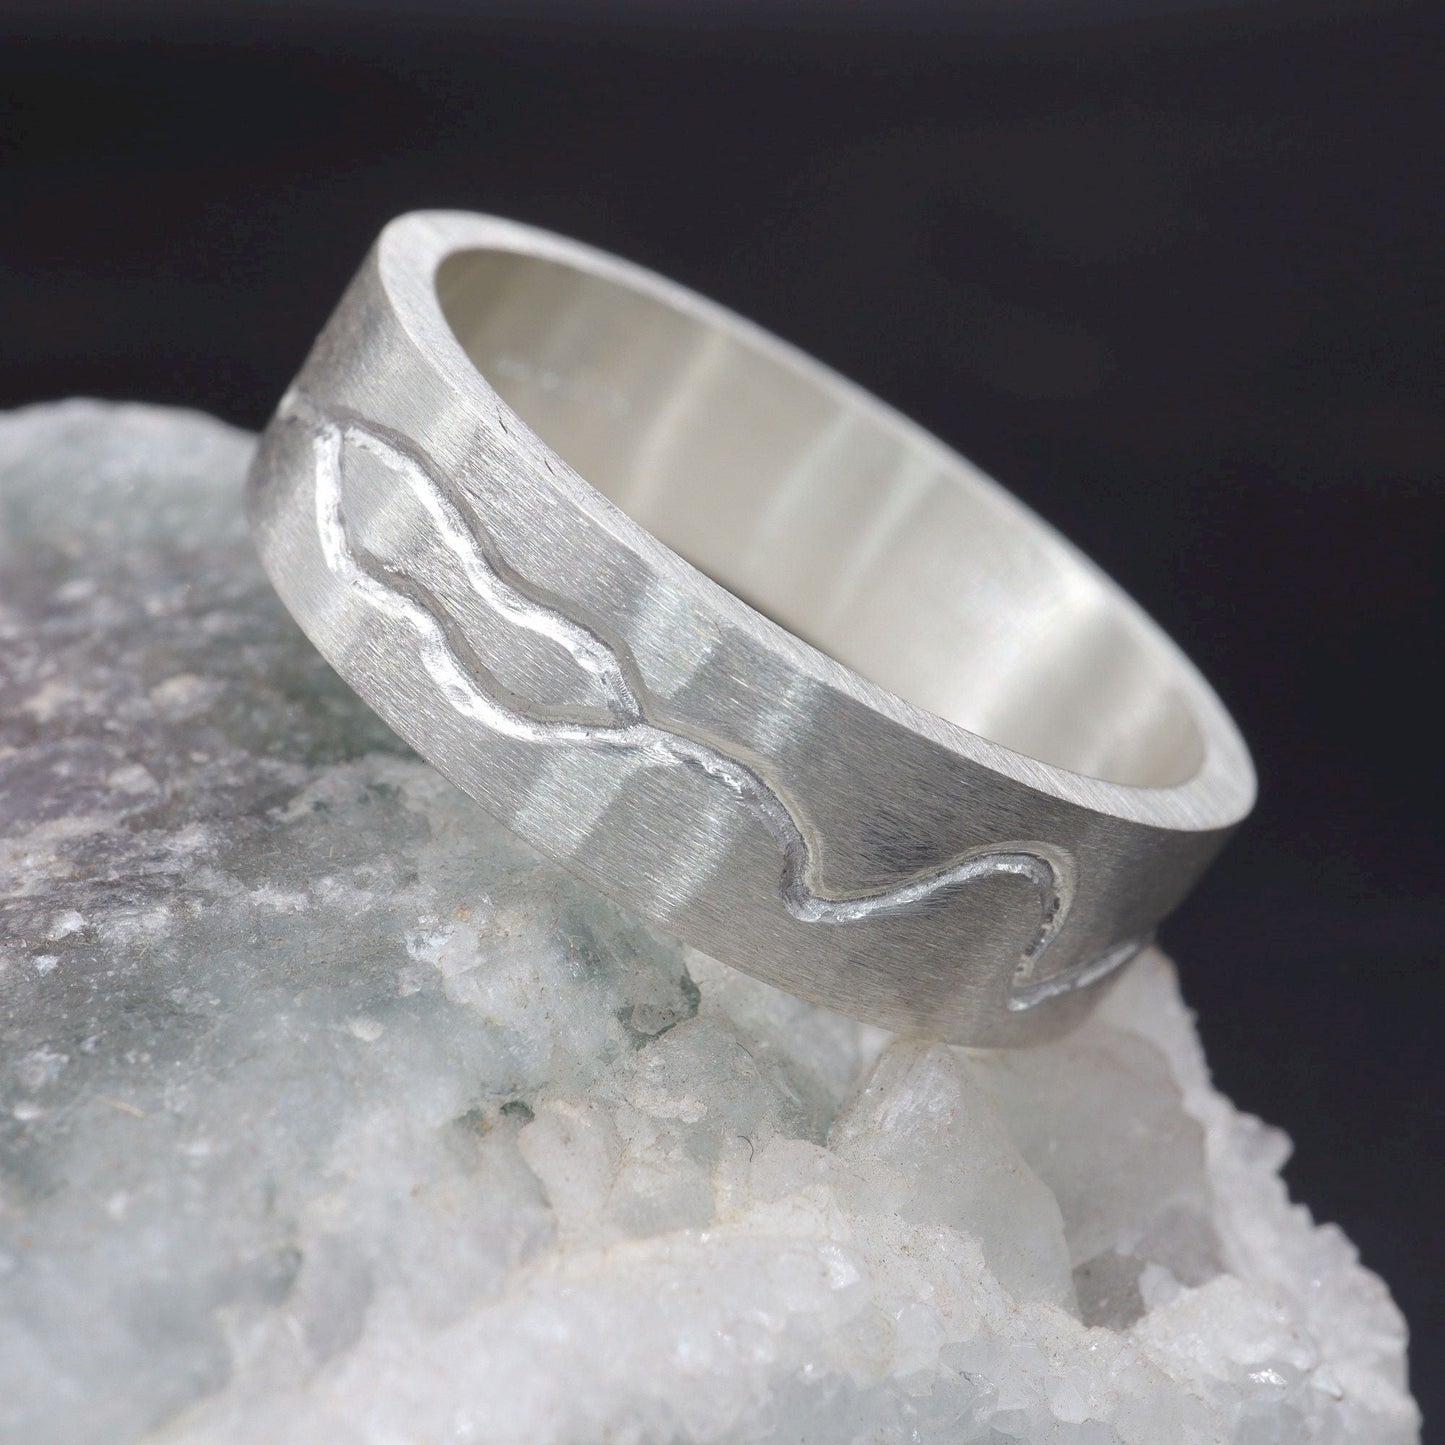 Commitment, Promise, Engagement mens ring - flat carved textured band - Water Beck design.